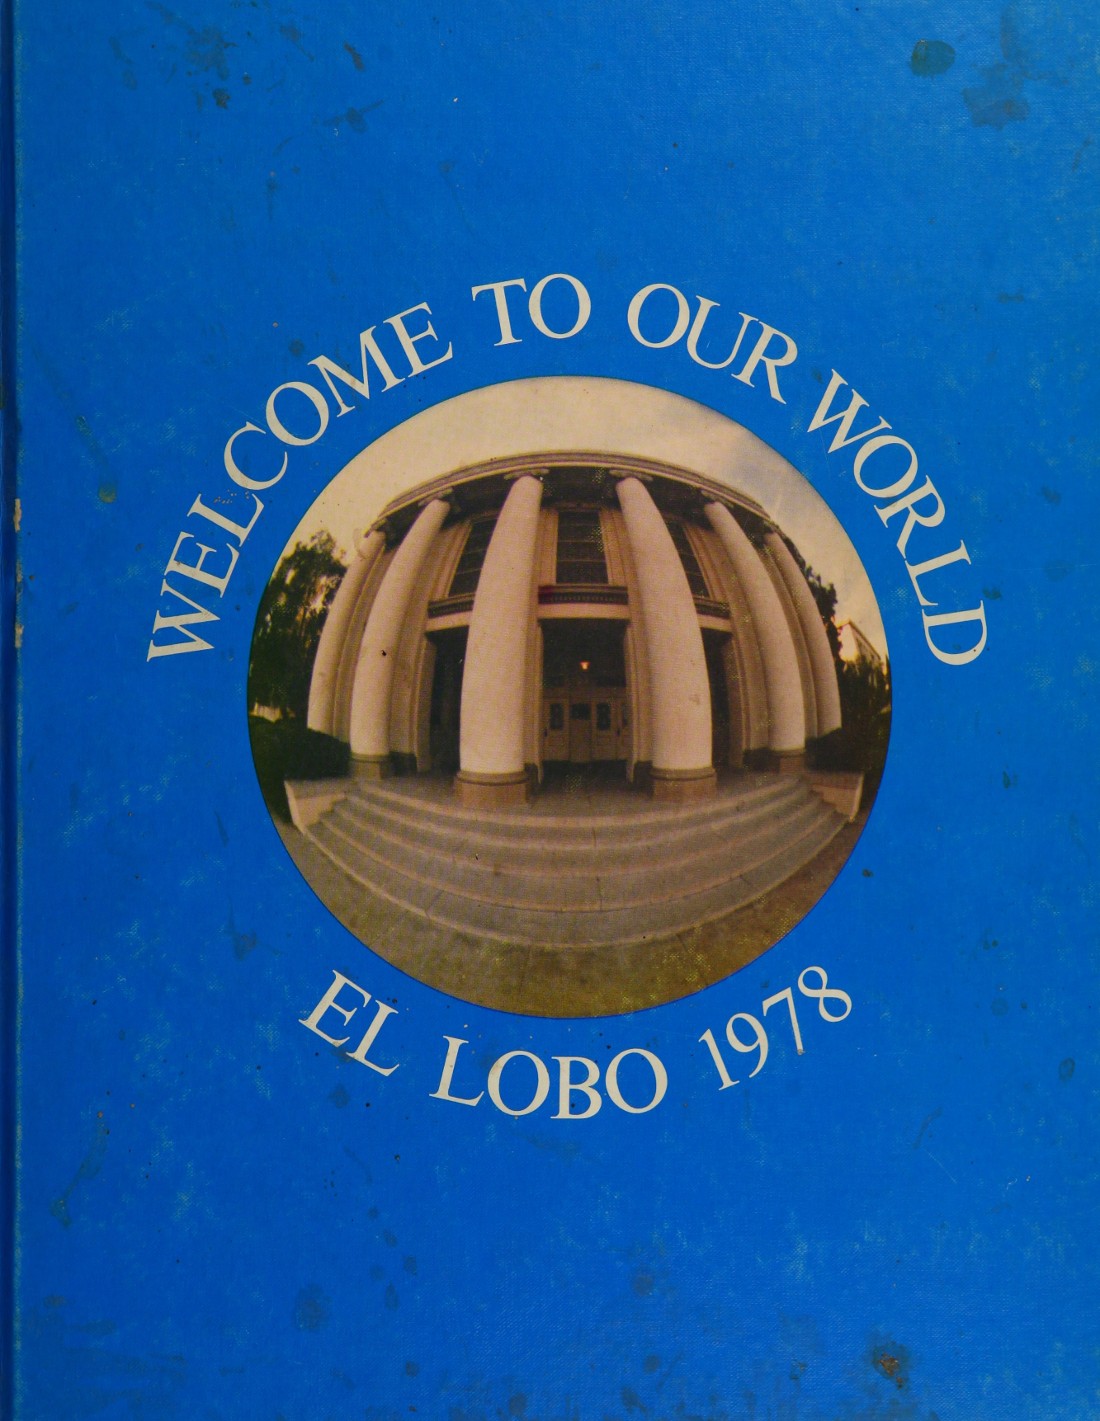 1978 yearbook from Chandler High School from Chandler, Arizona